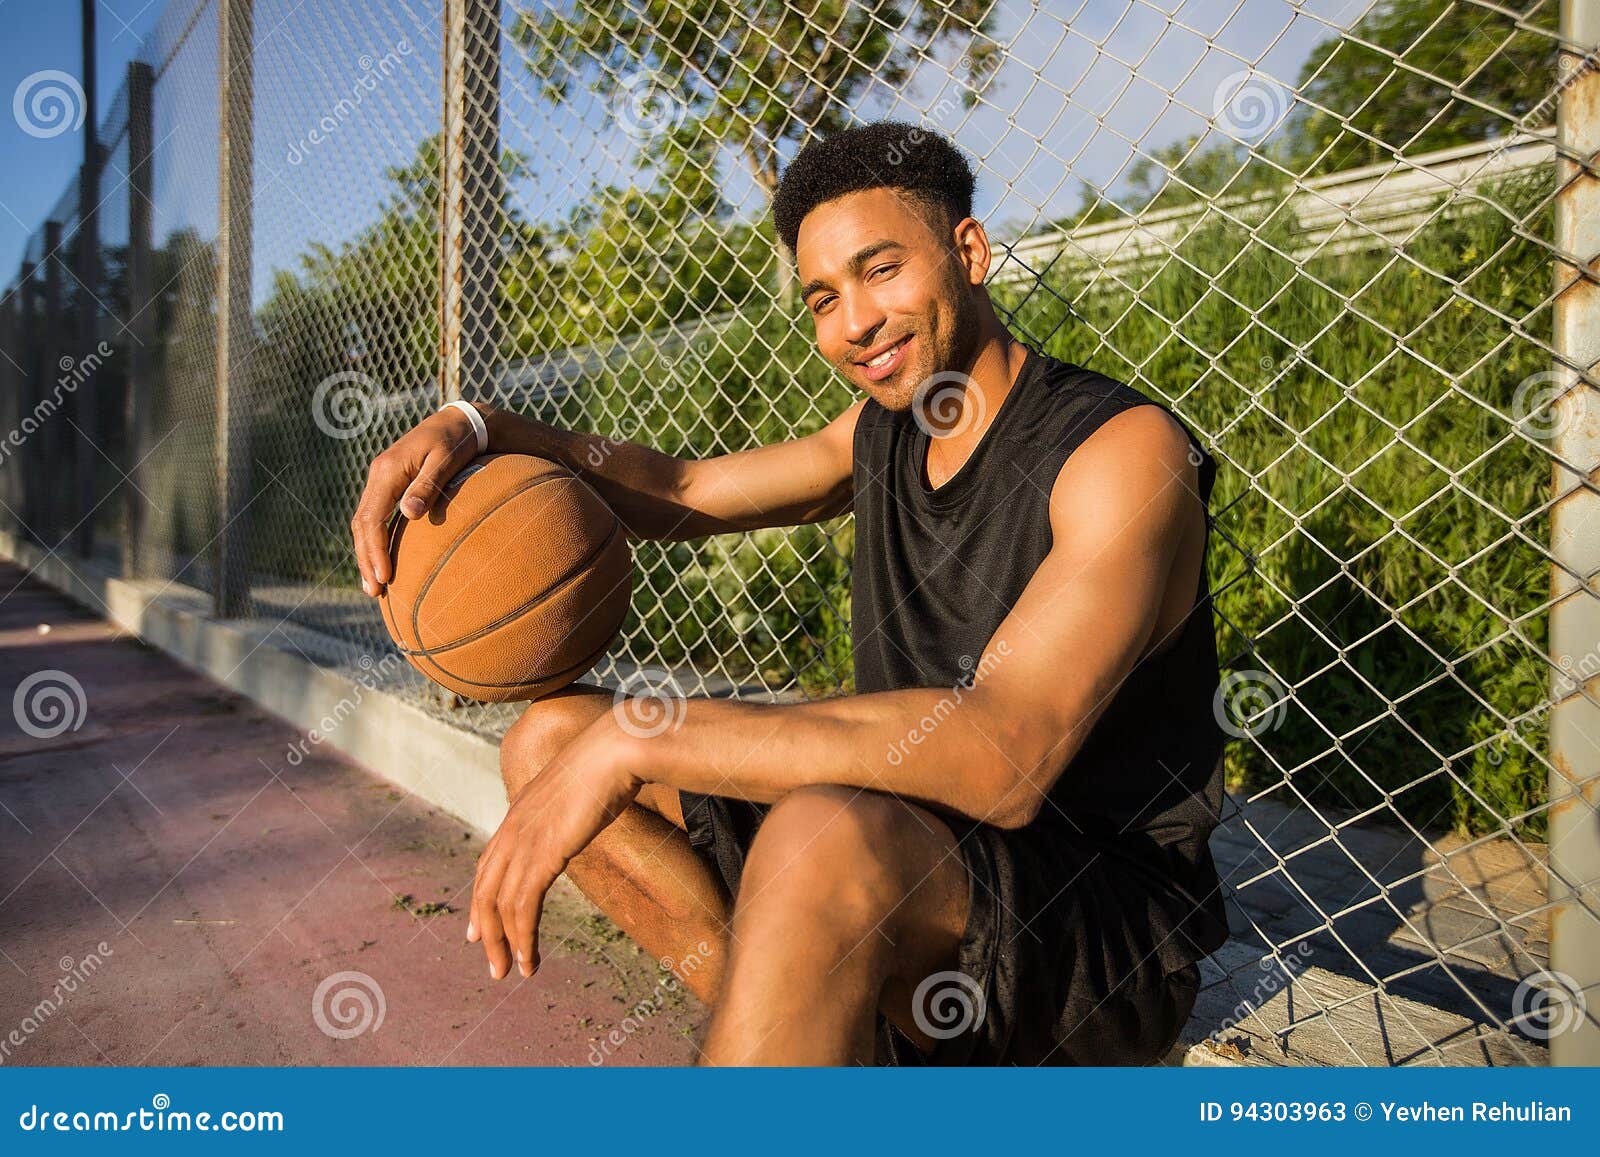 Man with Ball on Basketball  Looking To the Camera on a  Basketball Court Stock Image - Image of exercise, adult: 94303963